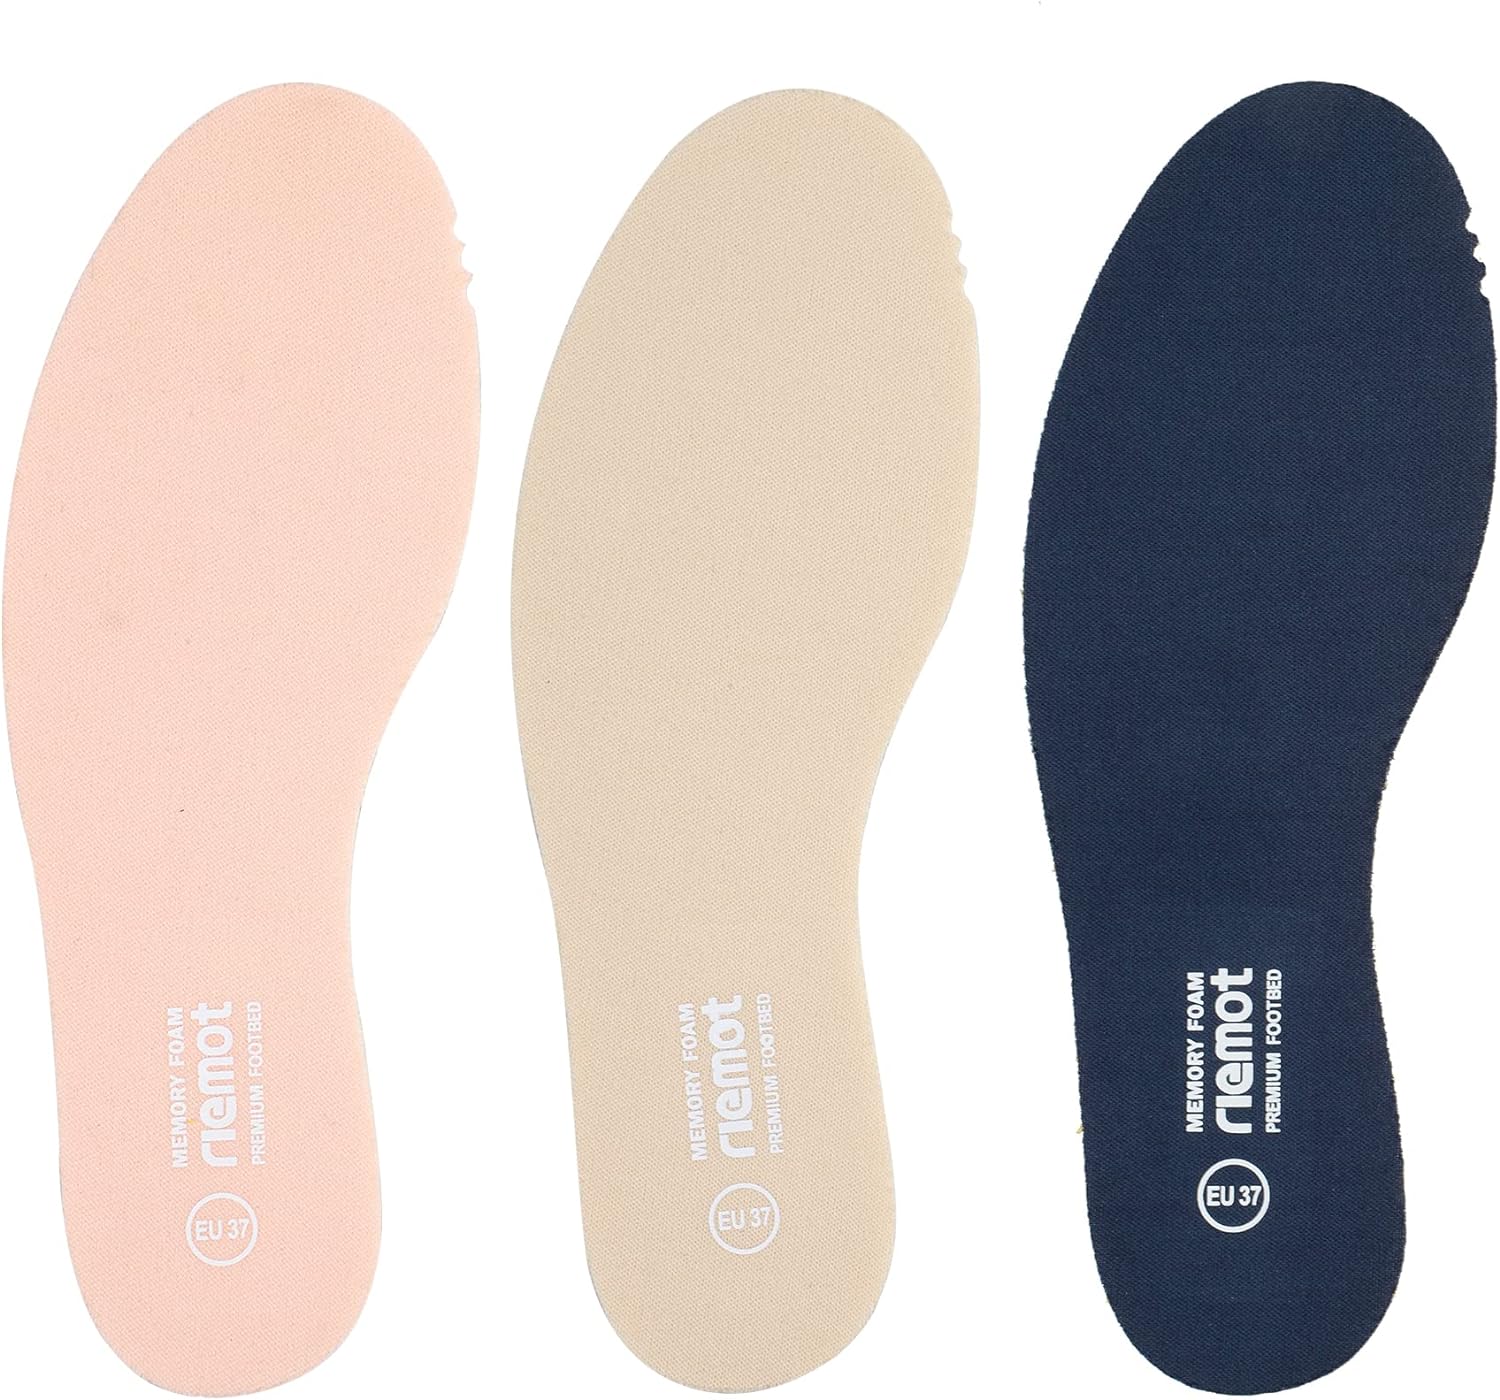 riemot Womens Memory Foam Insoles Super Soft Replacement Innersoles for Running Shoes Work Boots Comfort Cushioning Shoe Inserts Navy US 9 / EU 40